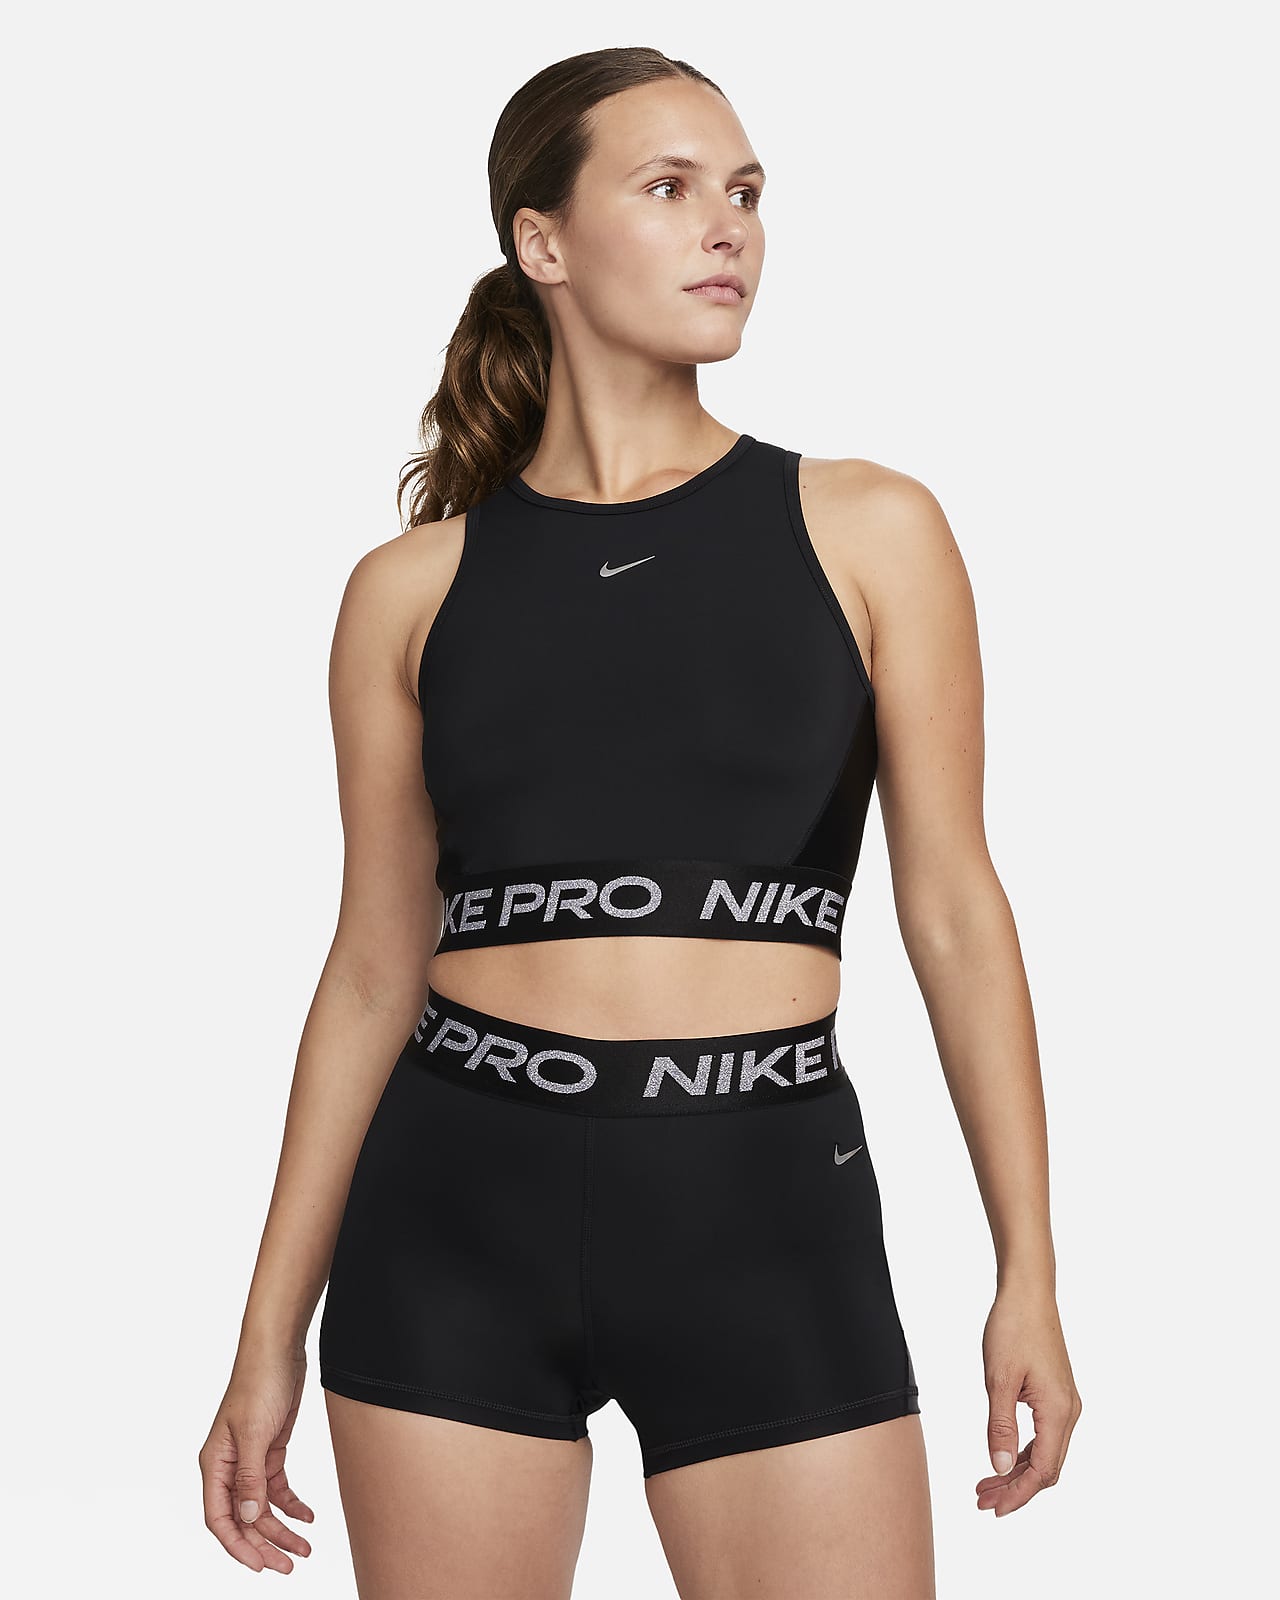 Nike Training Crossover Gym Crop Top and Leggings in Black